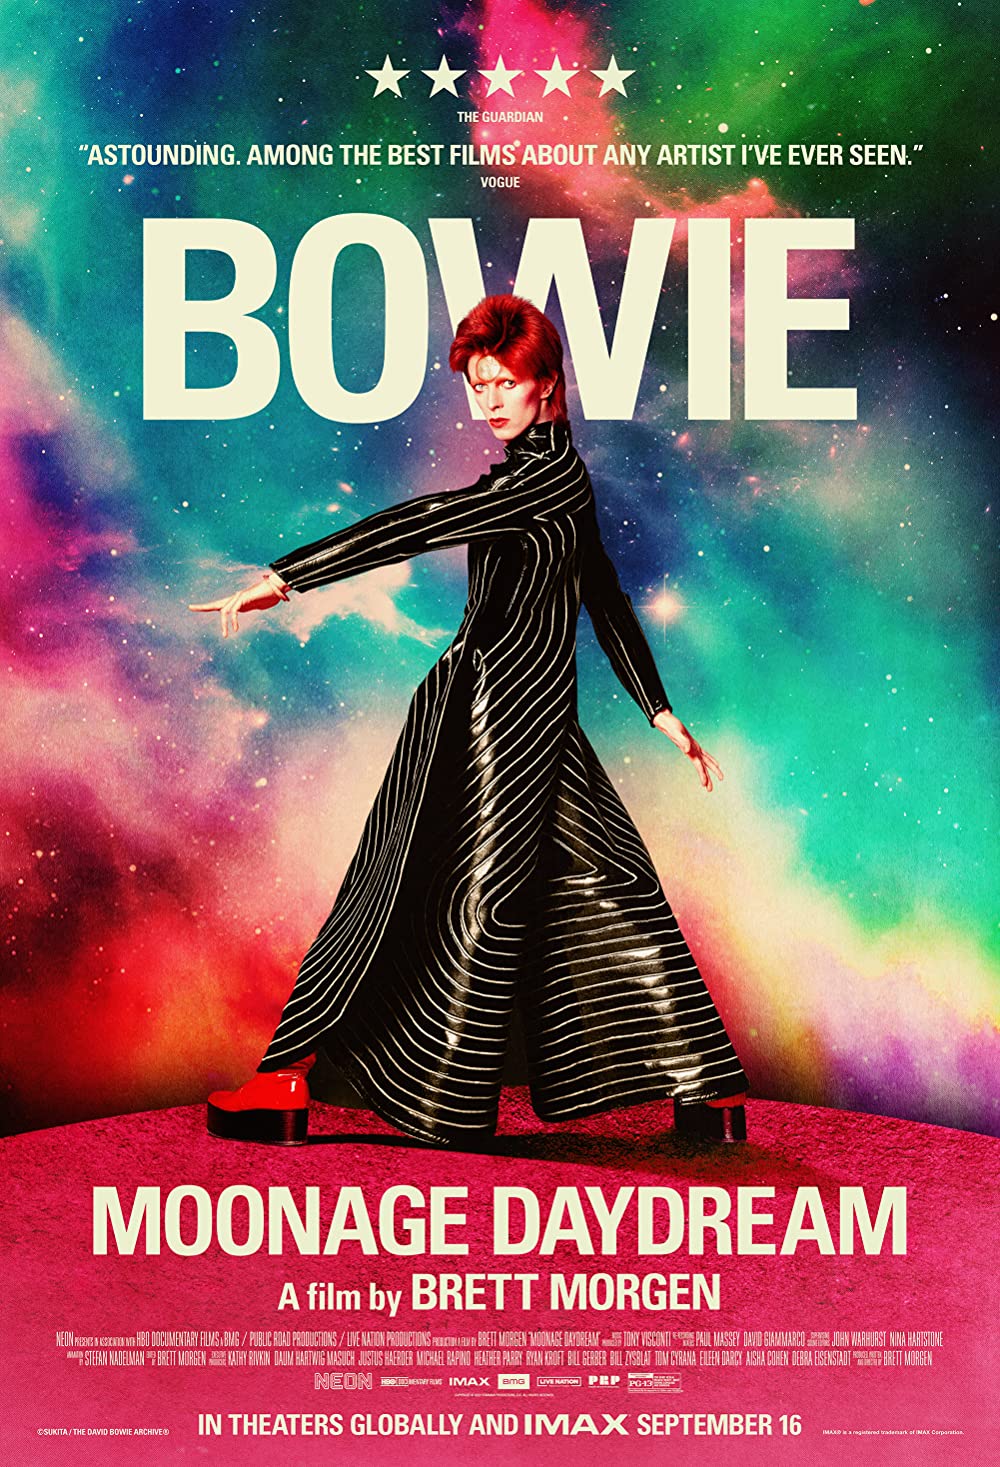 Moonage Daydream Parents Guide | Moonage Daydream Rating 2022